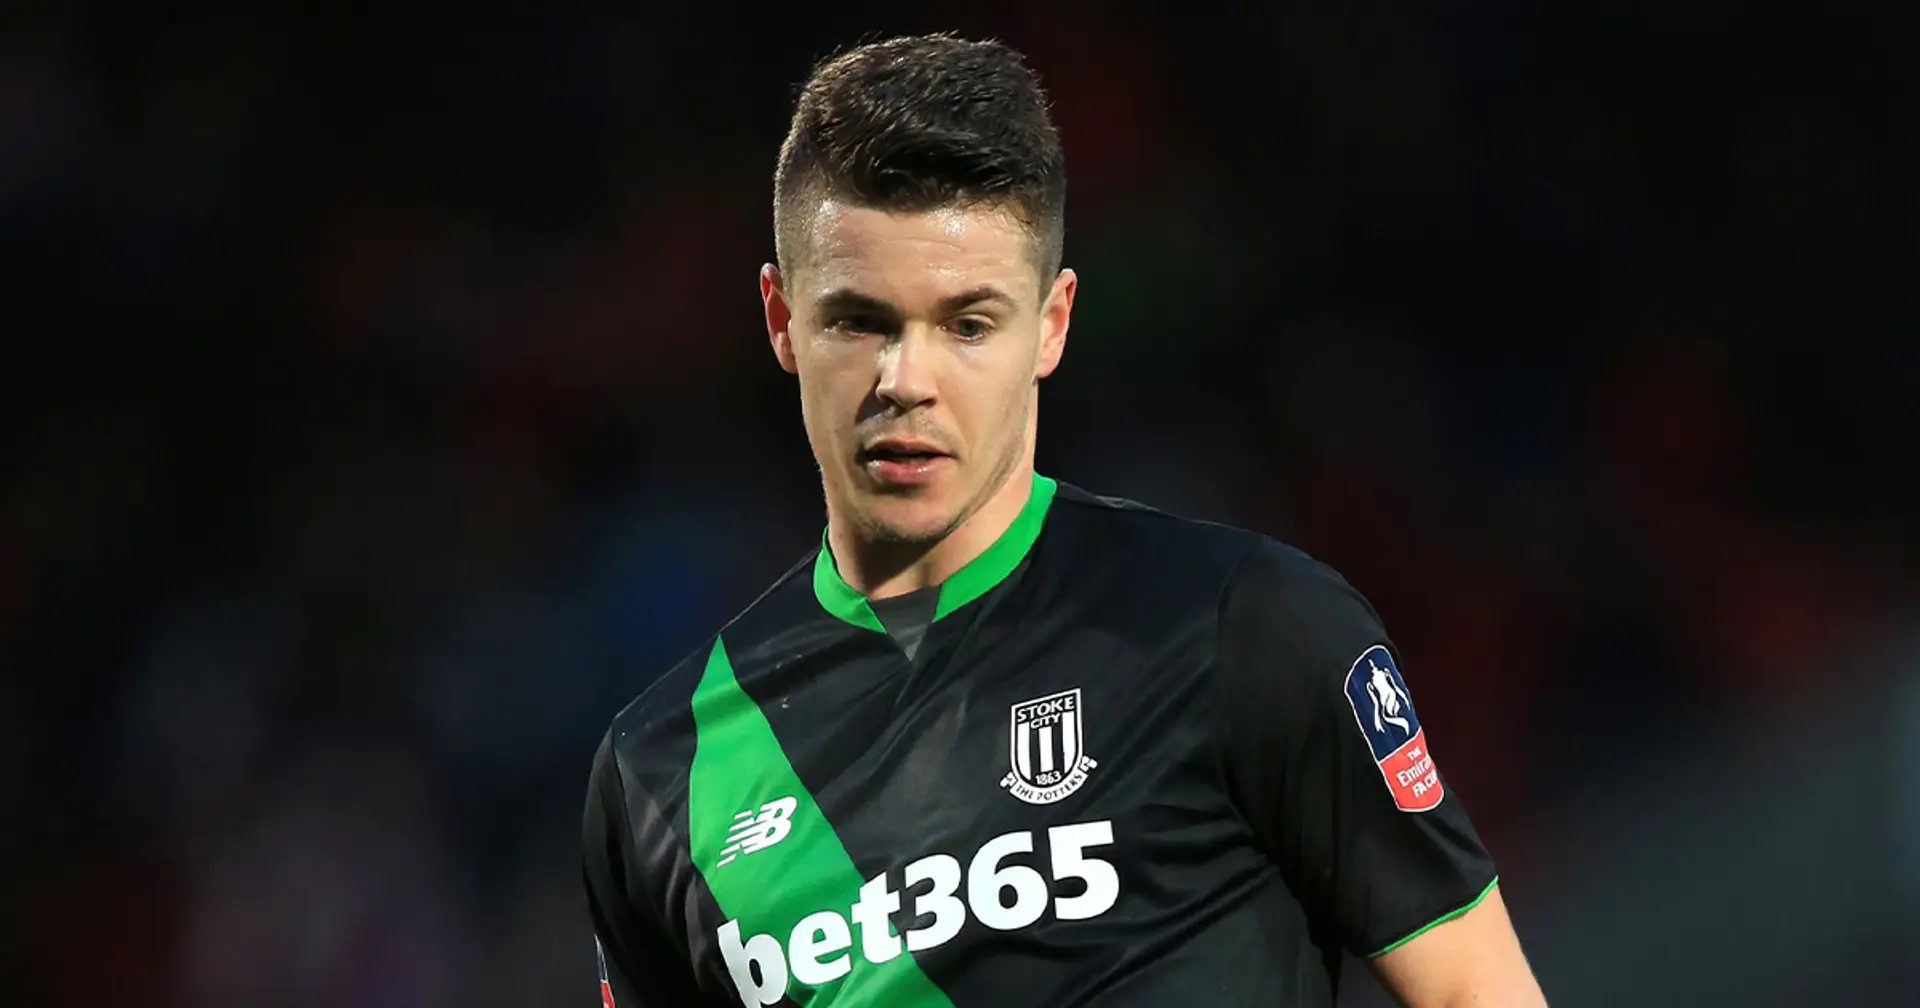 Van Ginkel still unsure of his Chelsea future: 'We haven’t had contact about that yet'